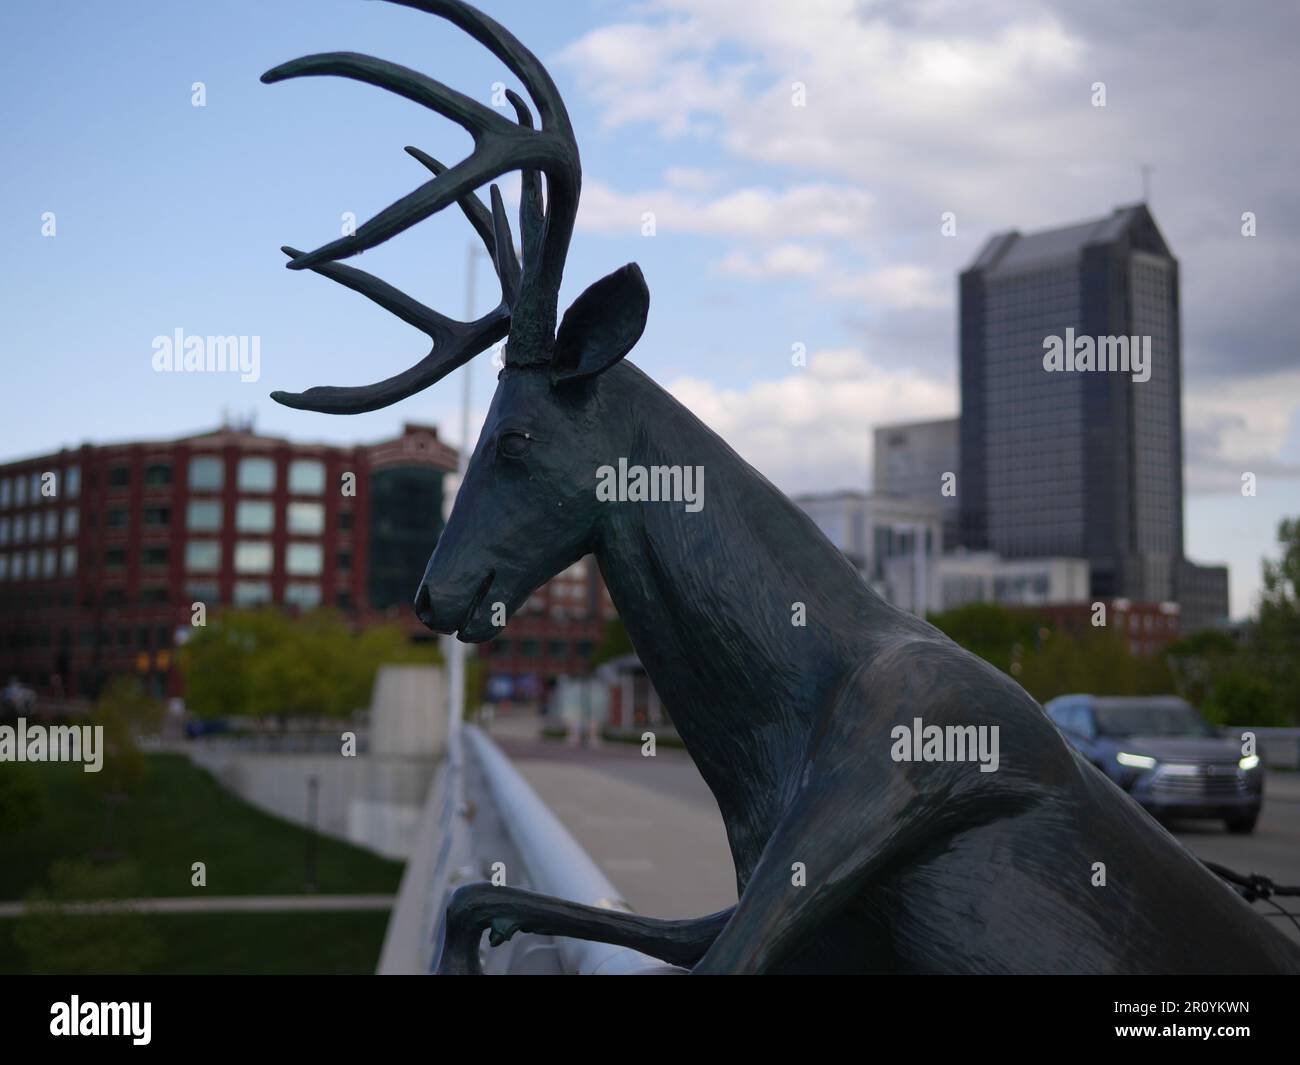 A bronze statue of a deer figure standing in a public area of downtown Columbus, Ohio Stock Photo